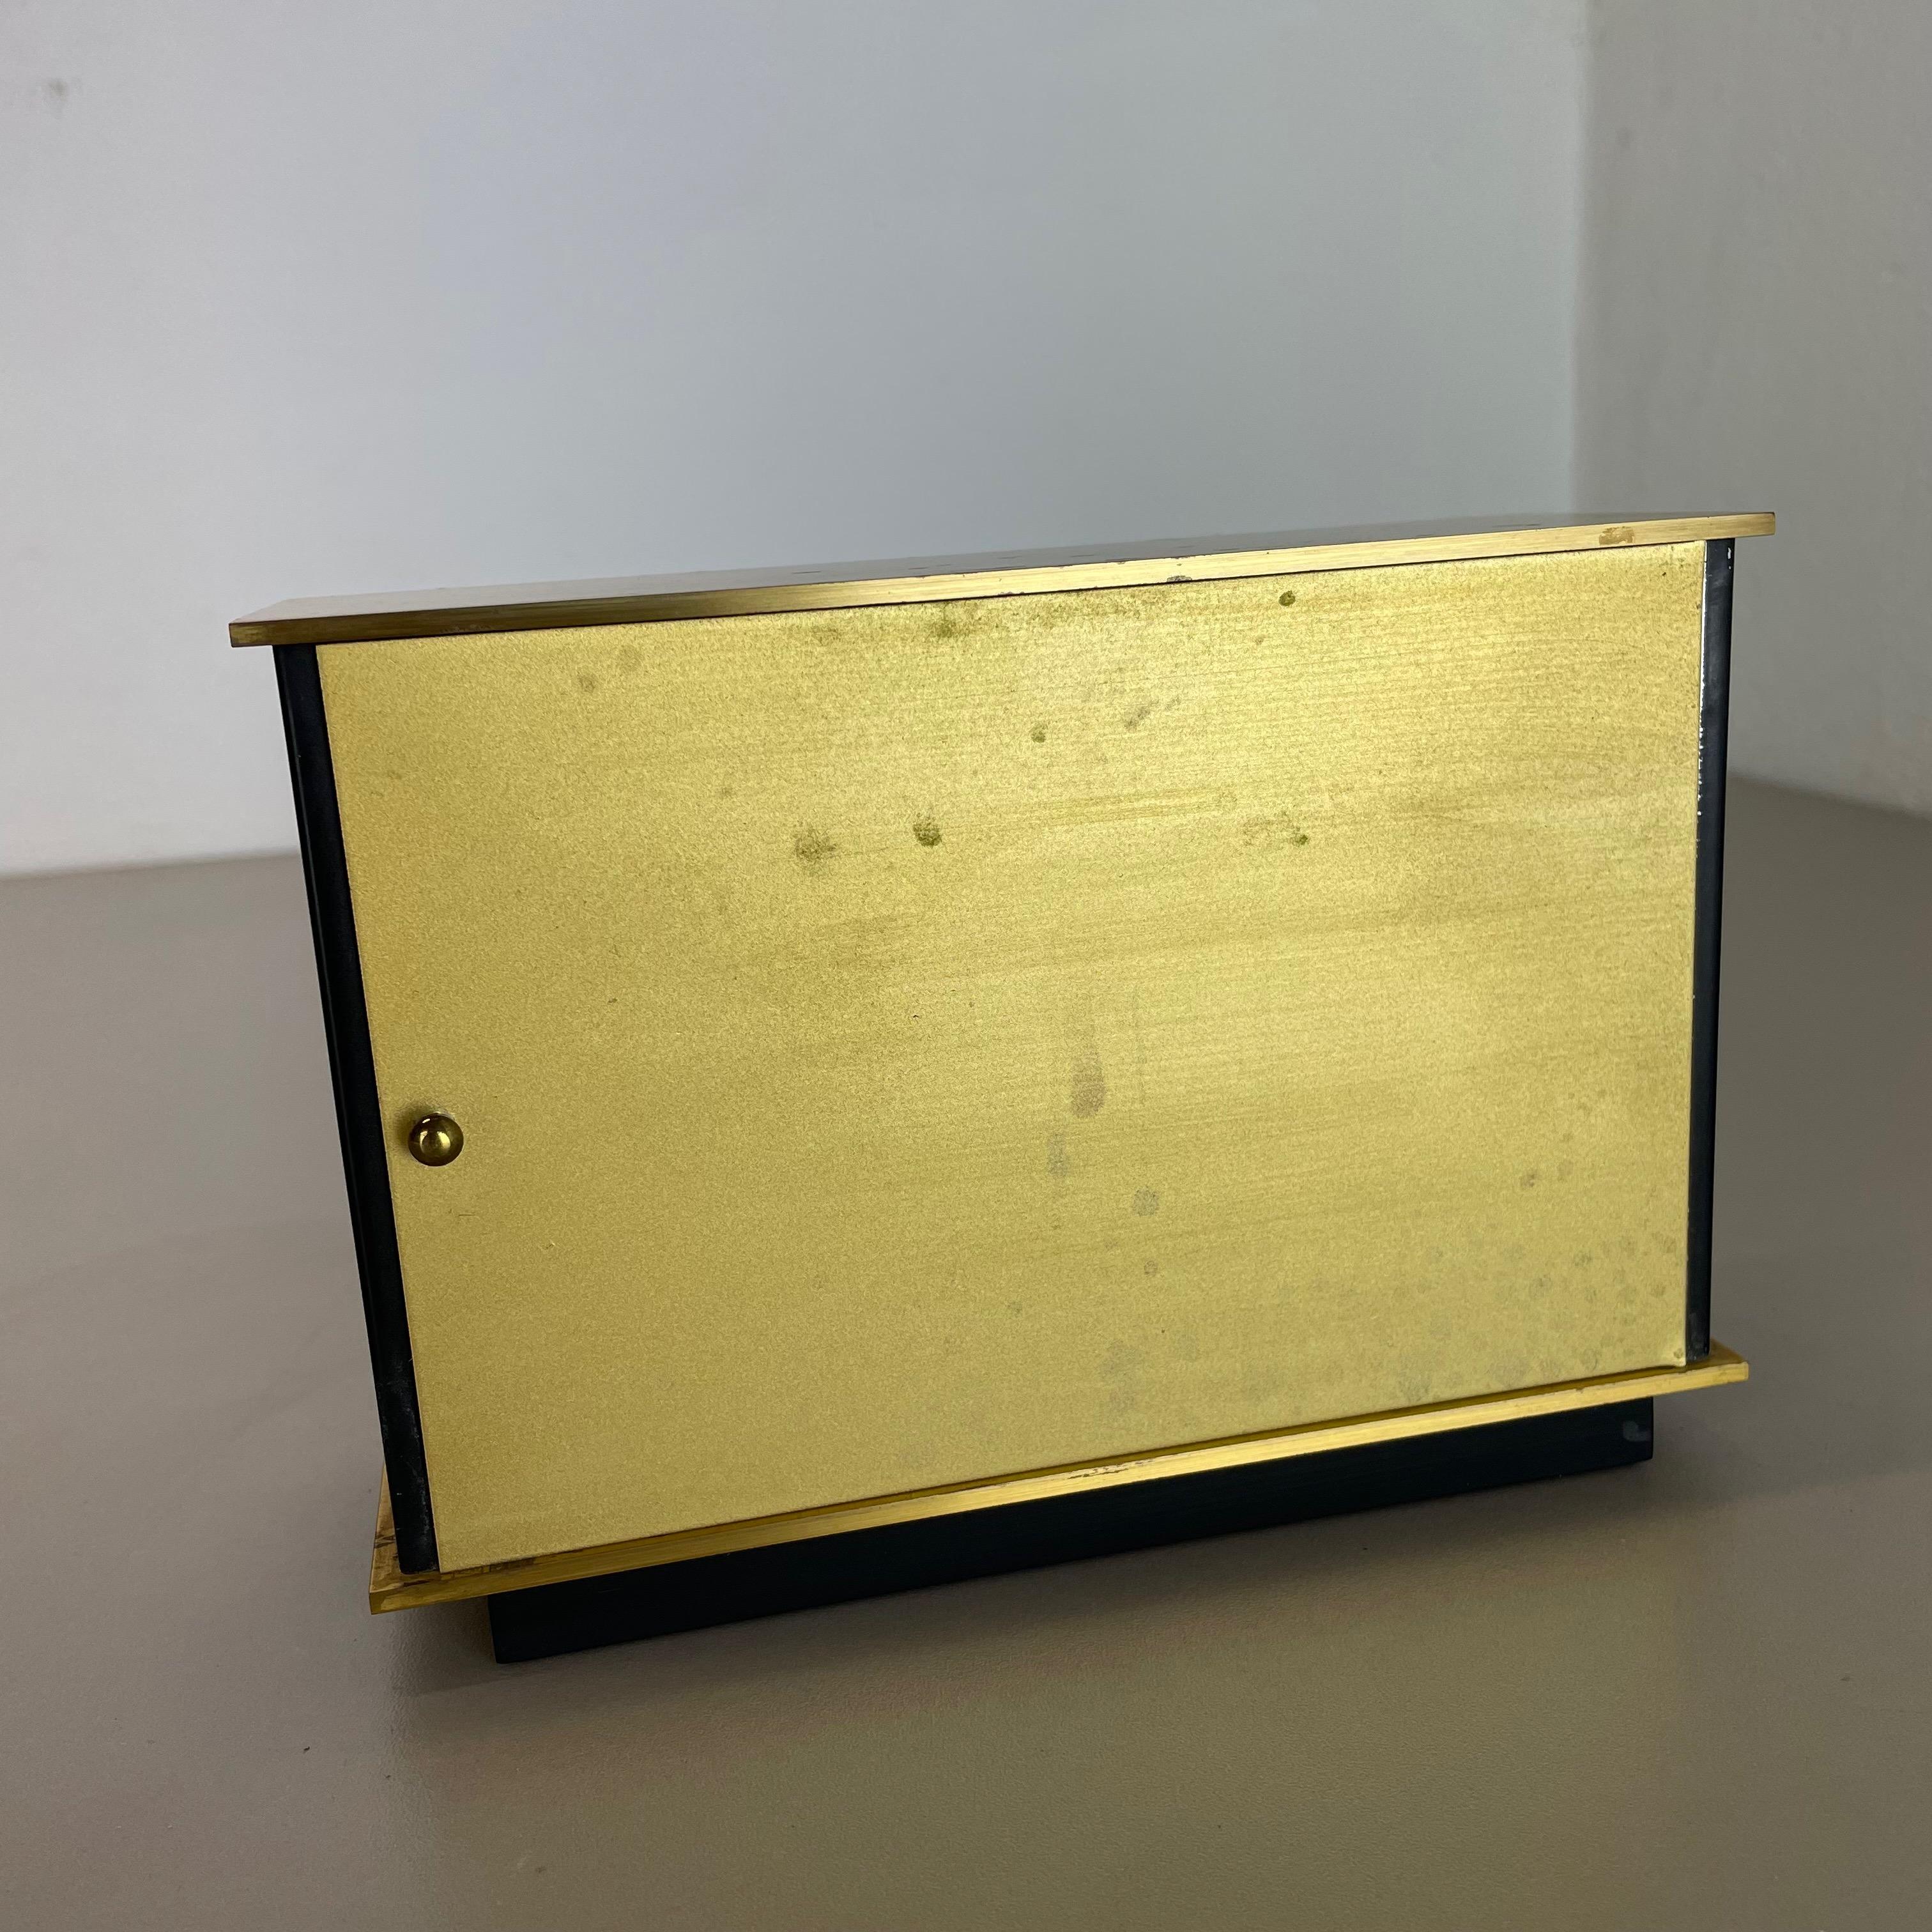 Vintage Modernist Metal Brass Table Clock by Diehl Dilectron, Germany 1960s For Sale 10